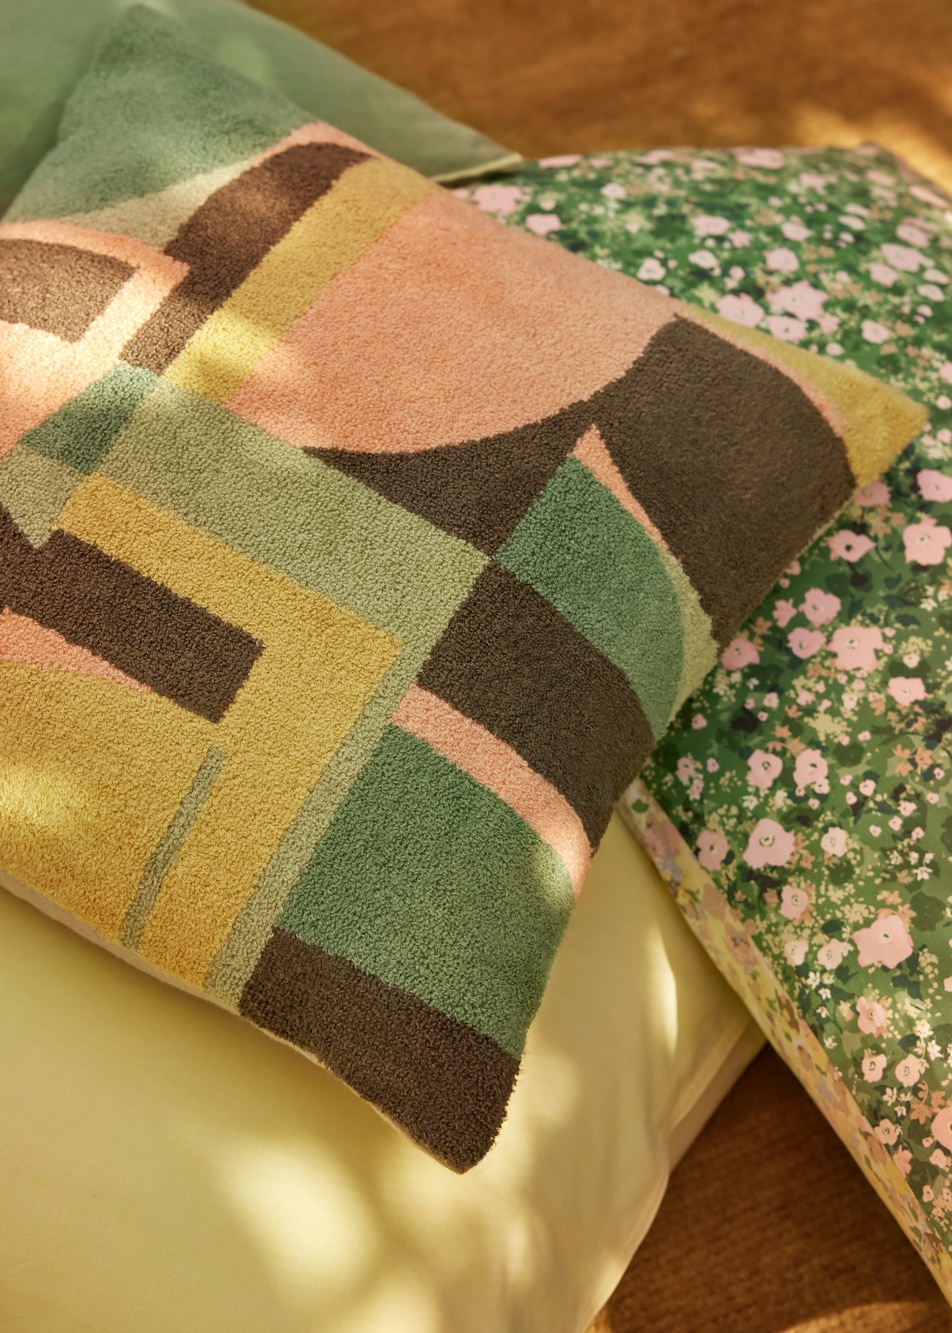 A close-up image of a stack of printed cushions